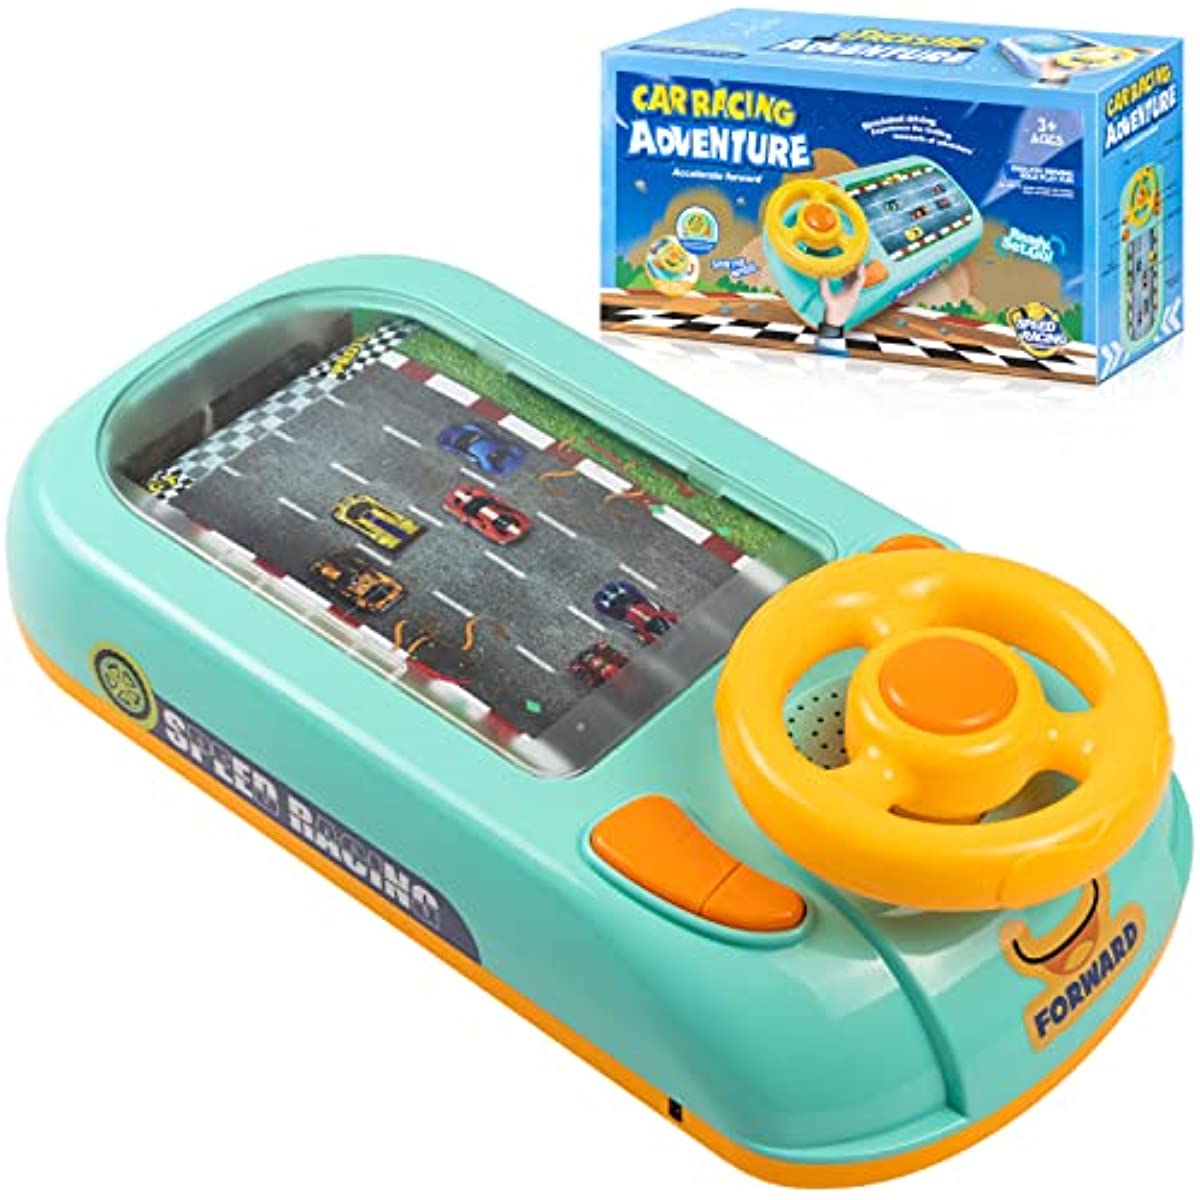 Novelty Baby Musical Steering Wheel Toy Toddler Simulated Driving Racing Car Game with Sound Interactive Educational Learning Race Car Toys Gift